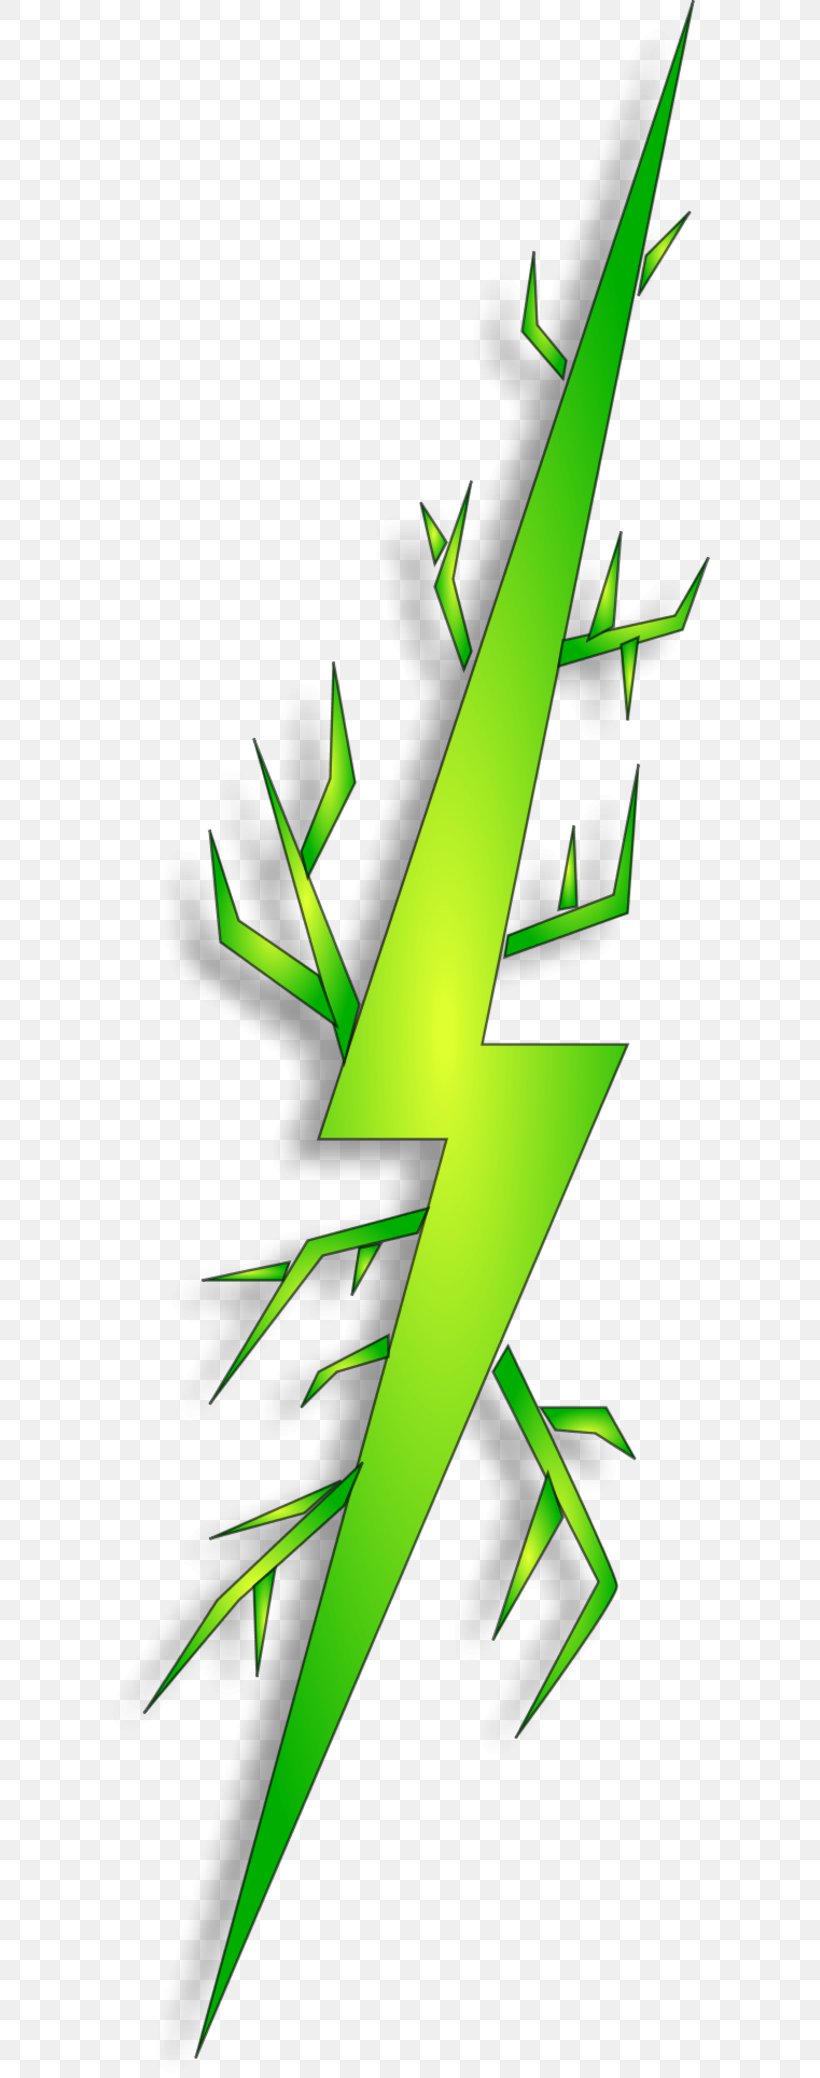 Electric Spark Electricity Clip Art, PNG, 600x2078px, Electric Spark, Electricity, Grass, Green, Leaf Download Free